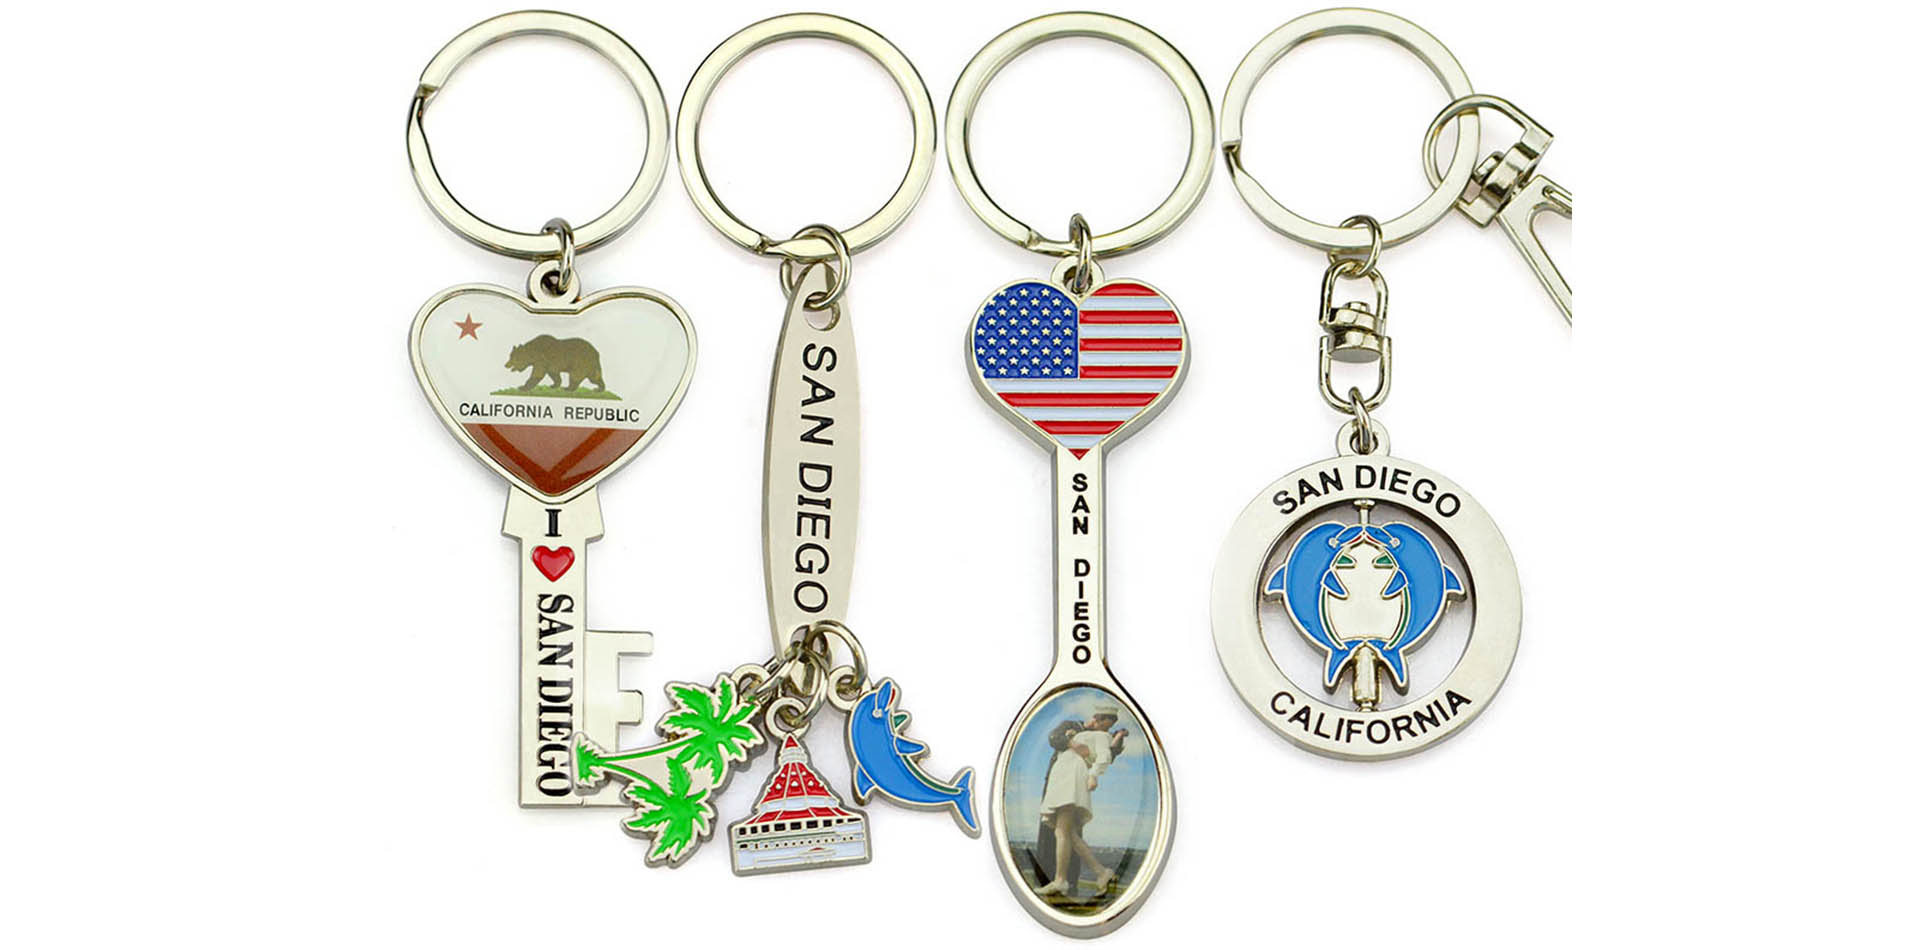 Look here：Personalize Your Keys with Custom Keychains